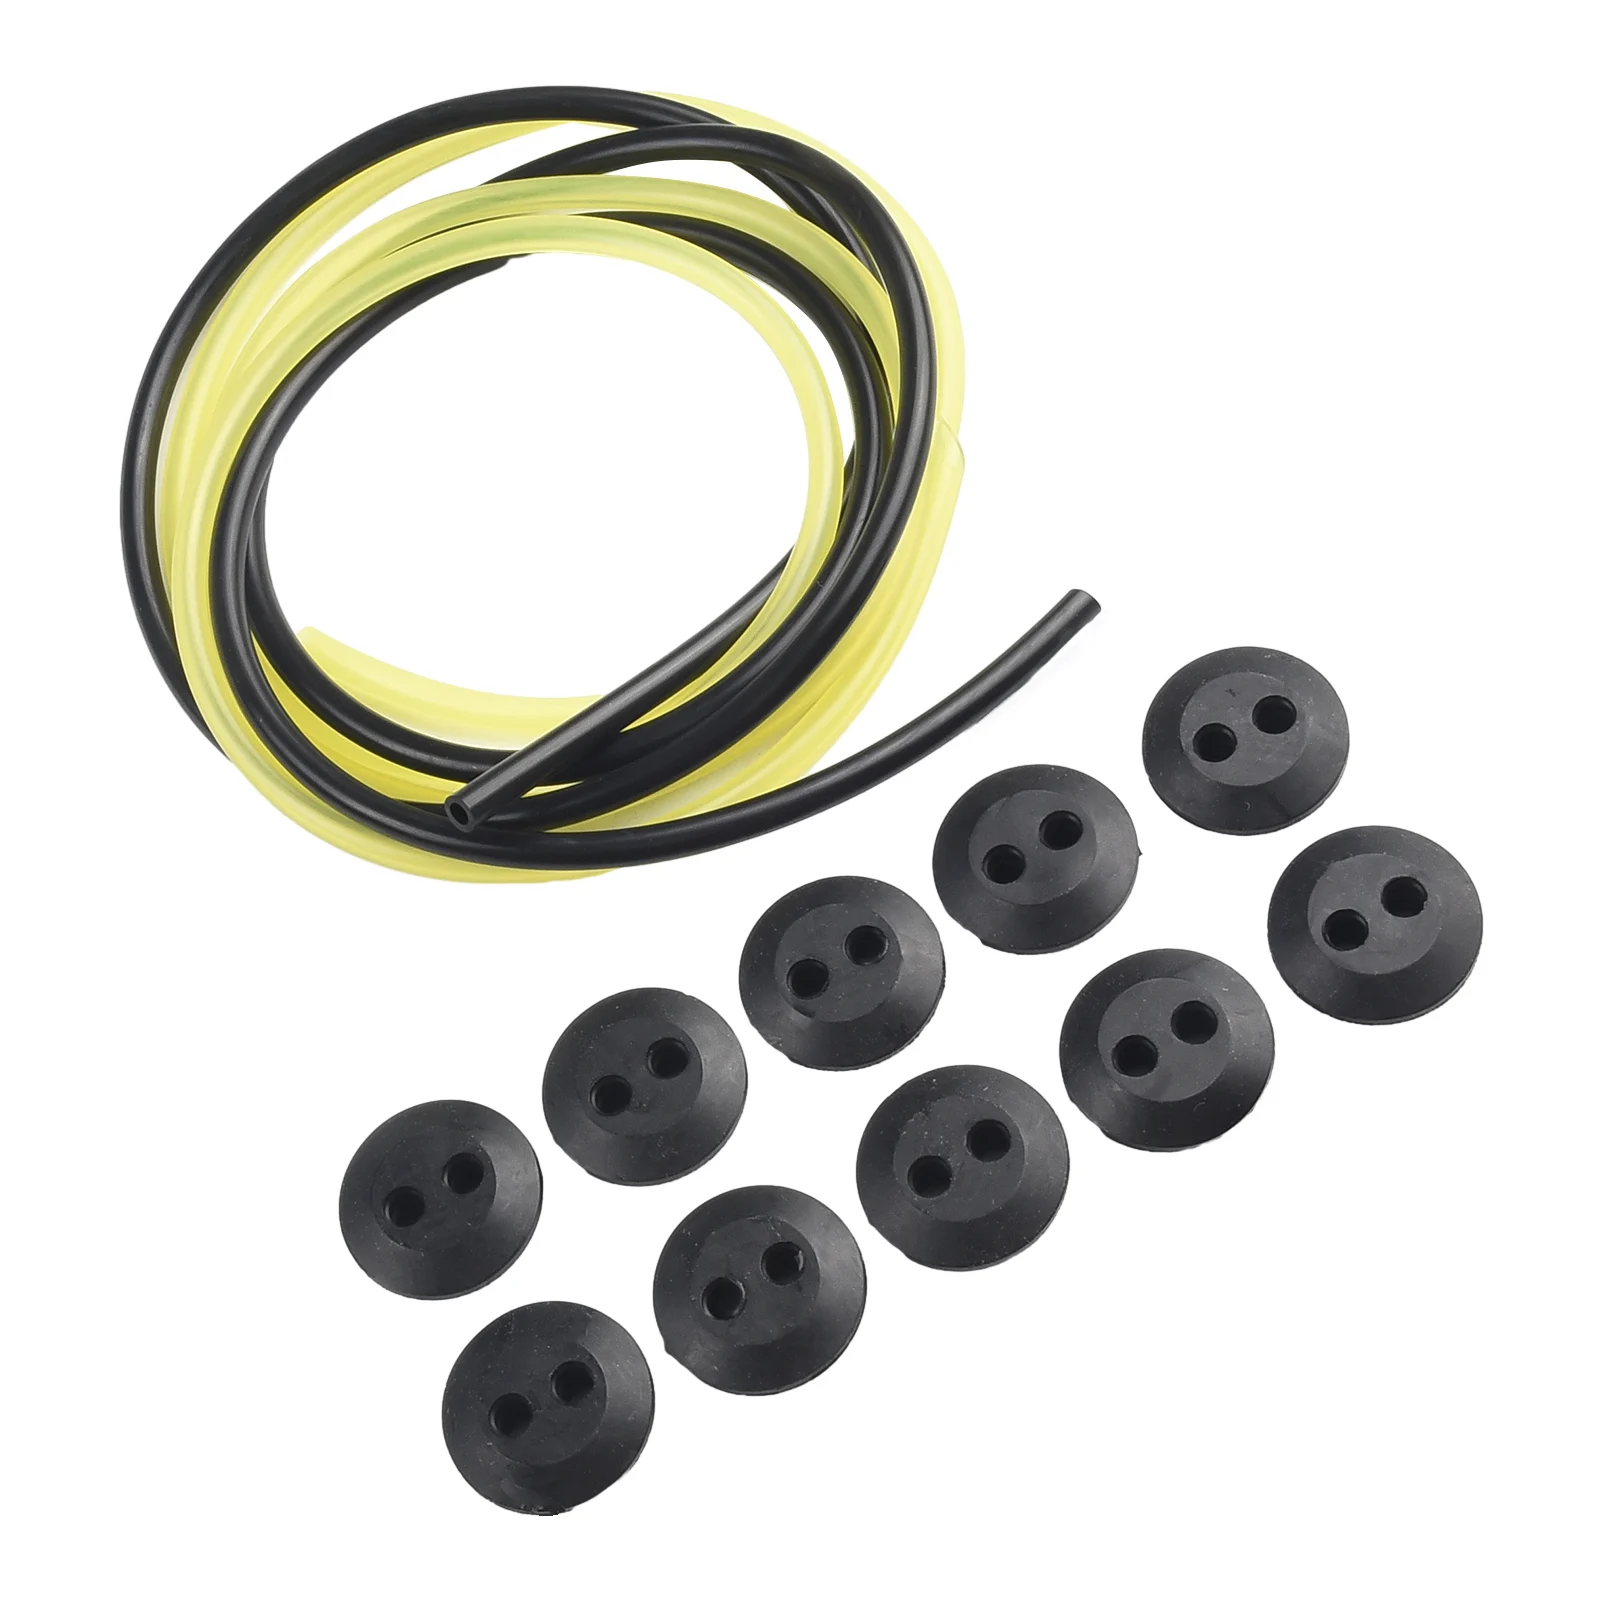 

12pcs 2 Holes Fuel Tank Grommet Rubber With Fuel Line Pipe For Brush Cutter Grass Trimmer Rubber Replacemnt Garden Supplies